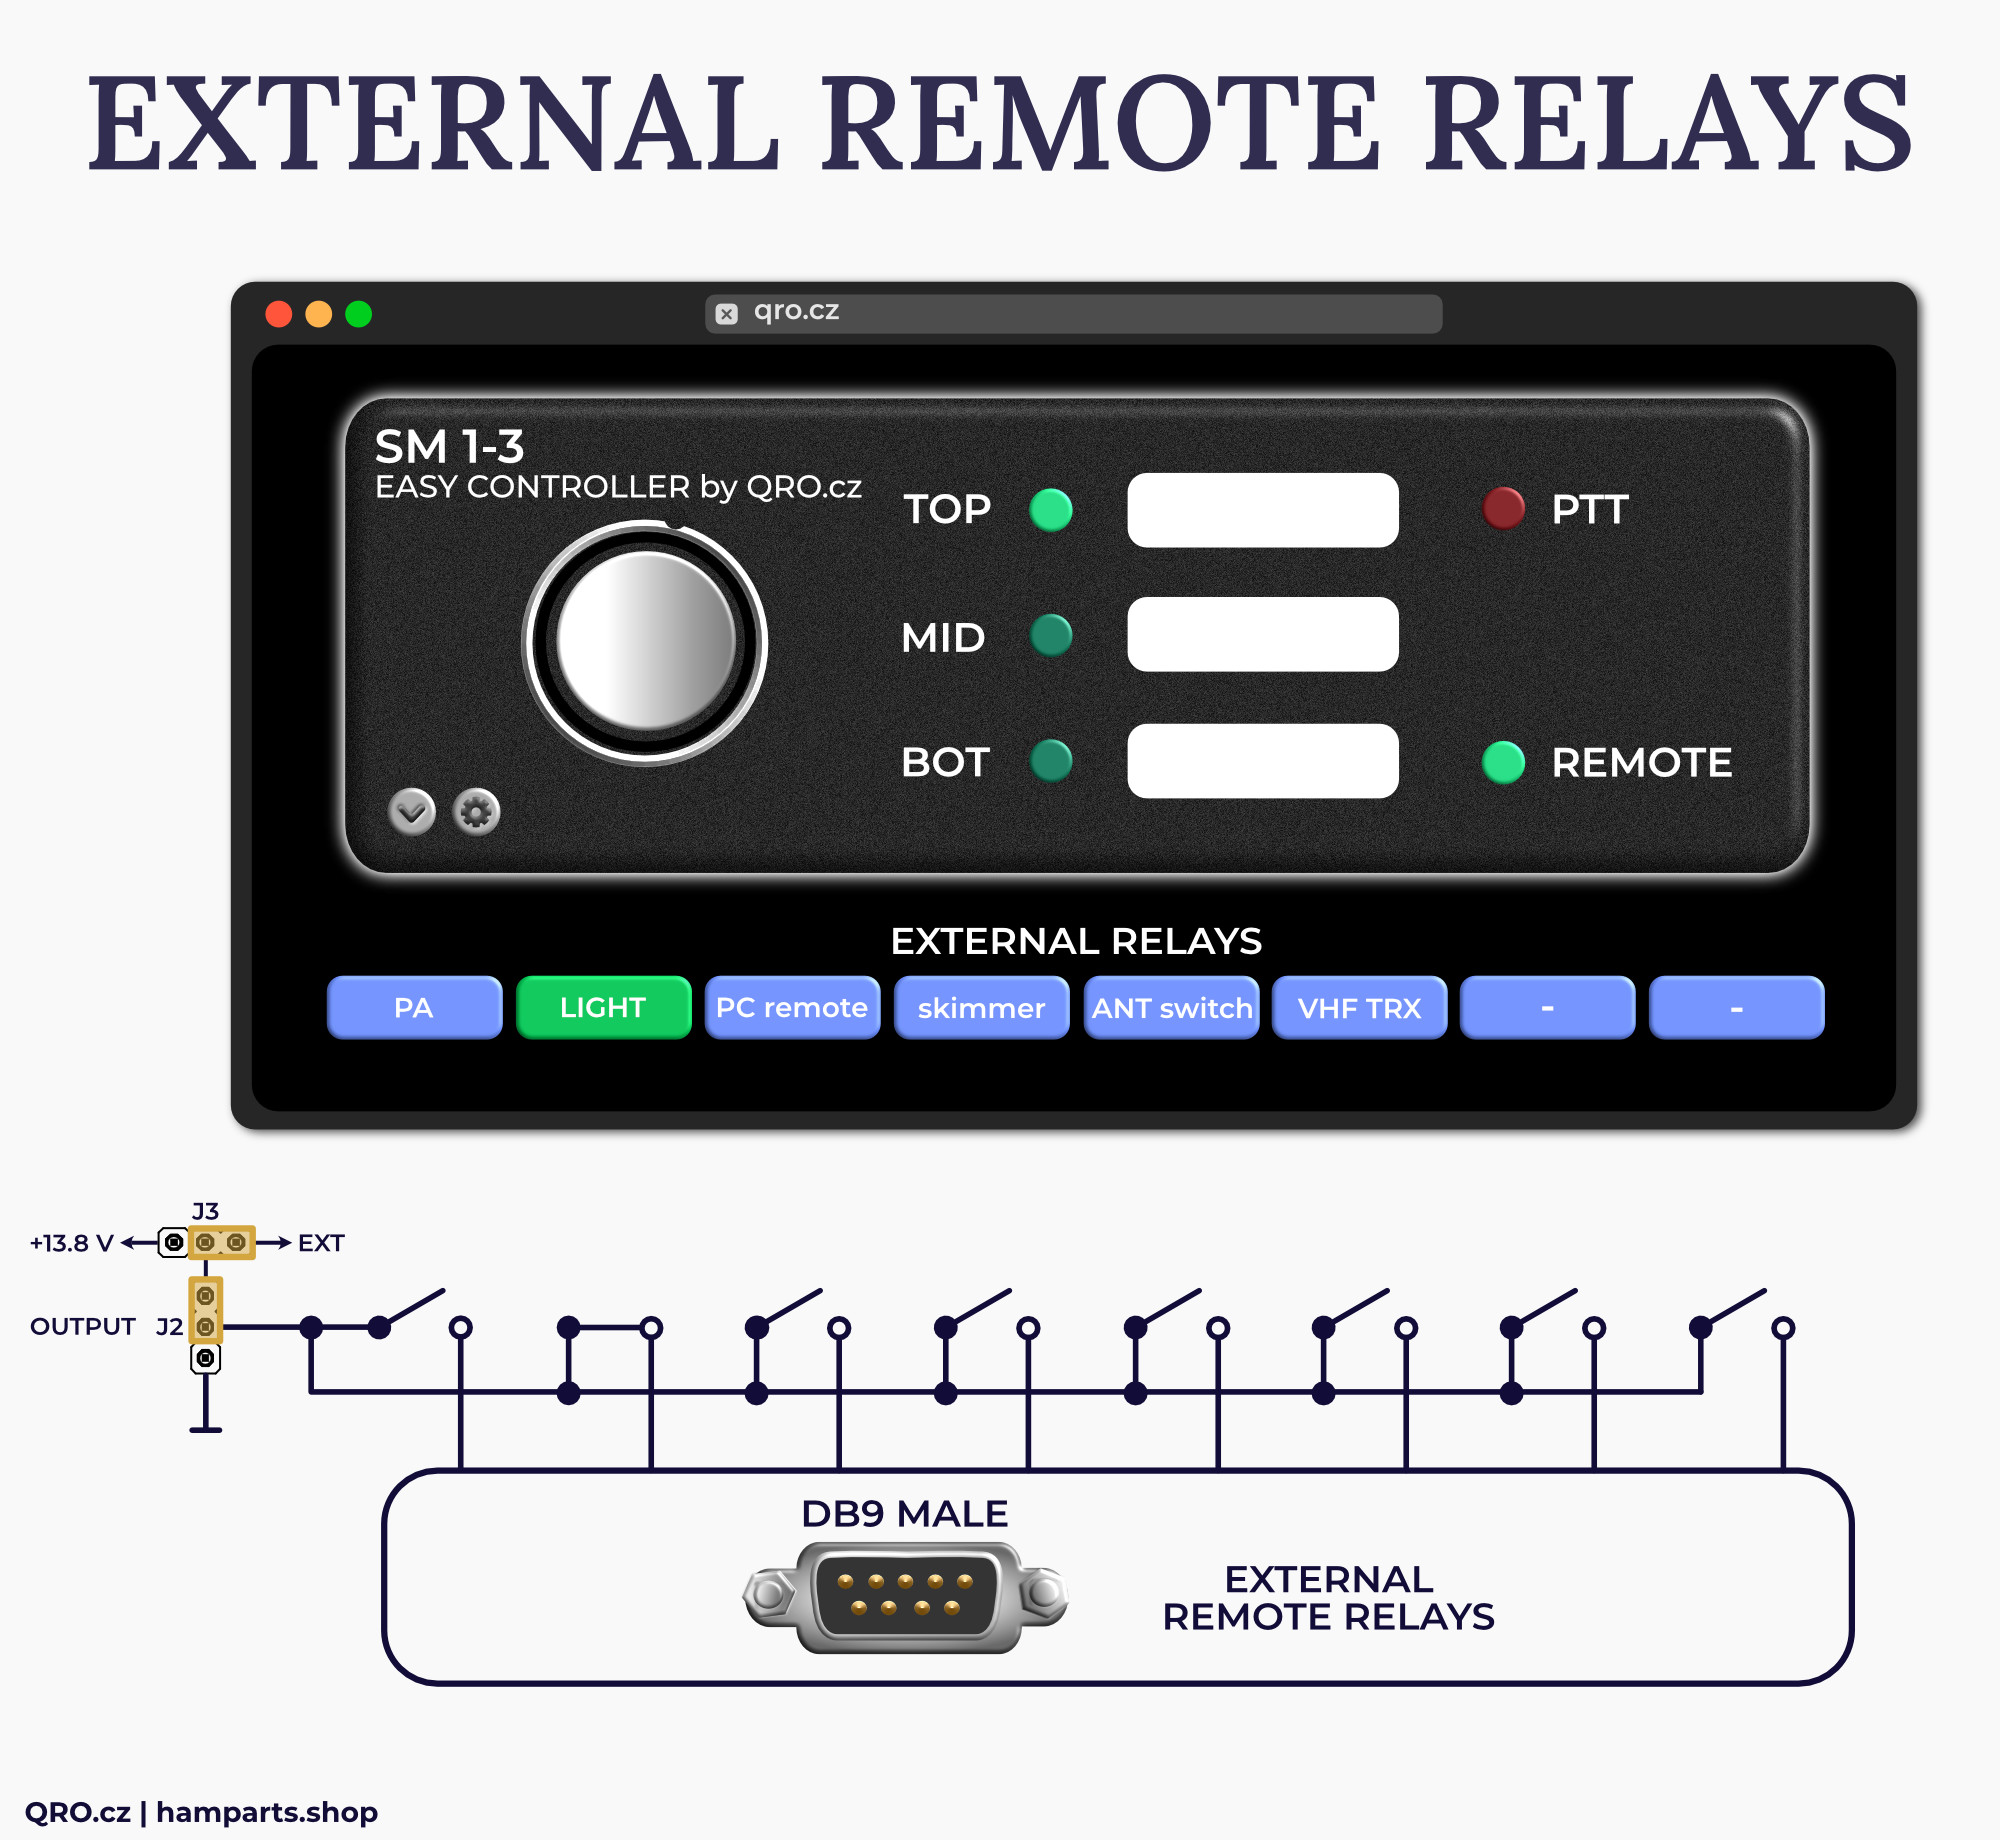 easy controller for stack match 1-3 example of external relays by qro.cz hamparts.shop